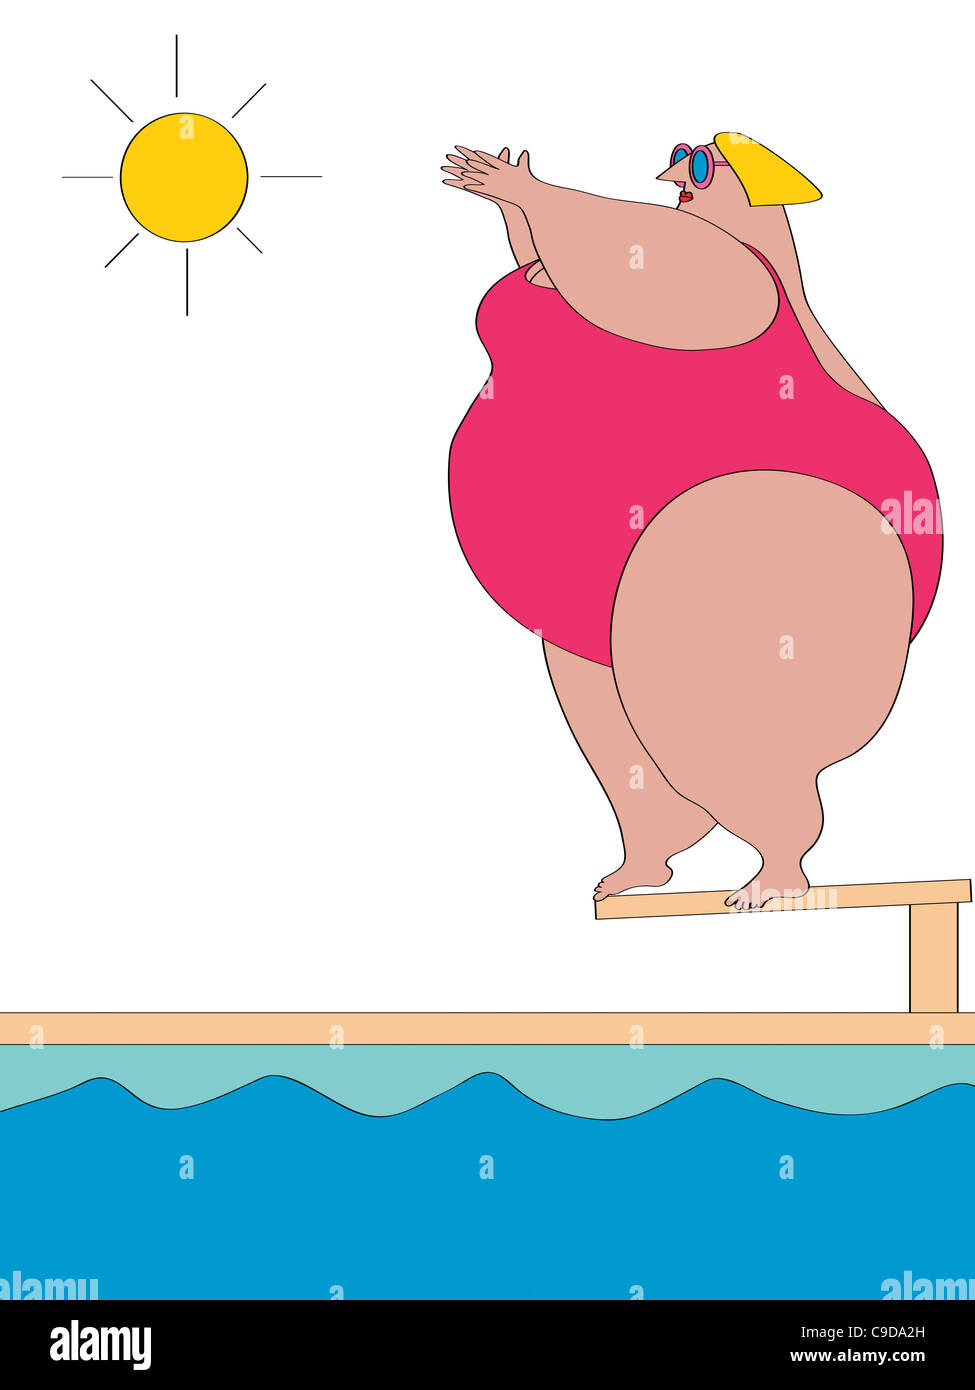 Overweight woman standing on edge of diving board, illustration Stock Photo